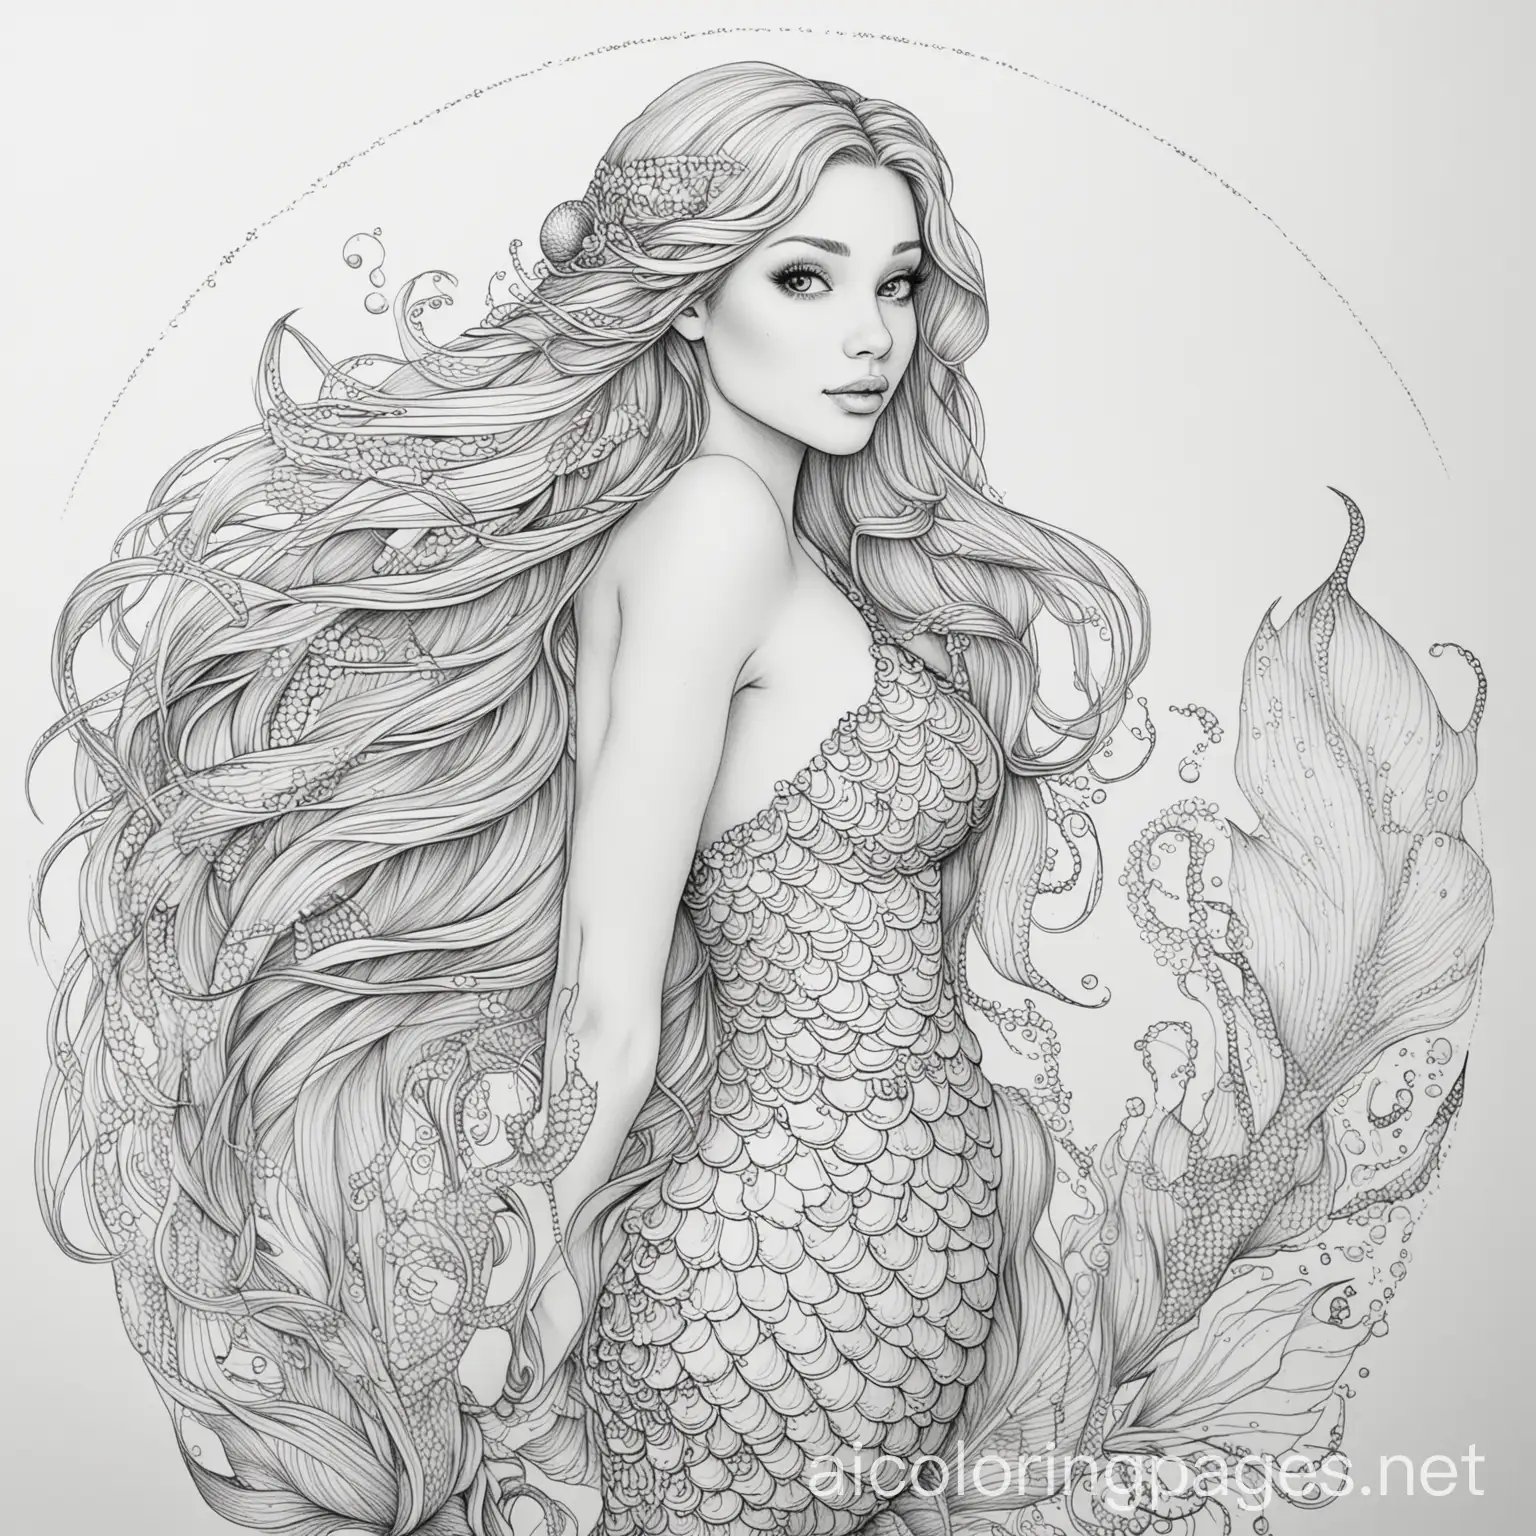 mermaid, Coloring Page, black and white, line art, white background, Simplicity, Ample White Space. The background of the coloring page is plain white to make it easy for young children to color within the lines. The outlines of all the subjects are easy to distinguish, making it simple for kids to color without too much difficulty